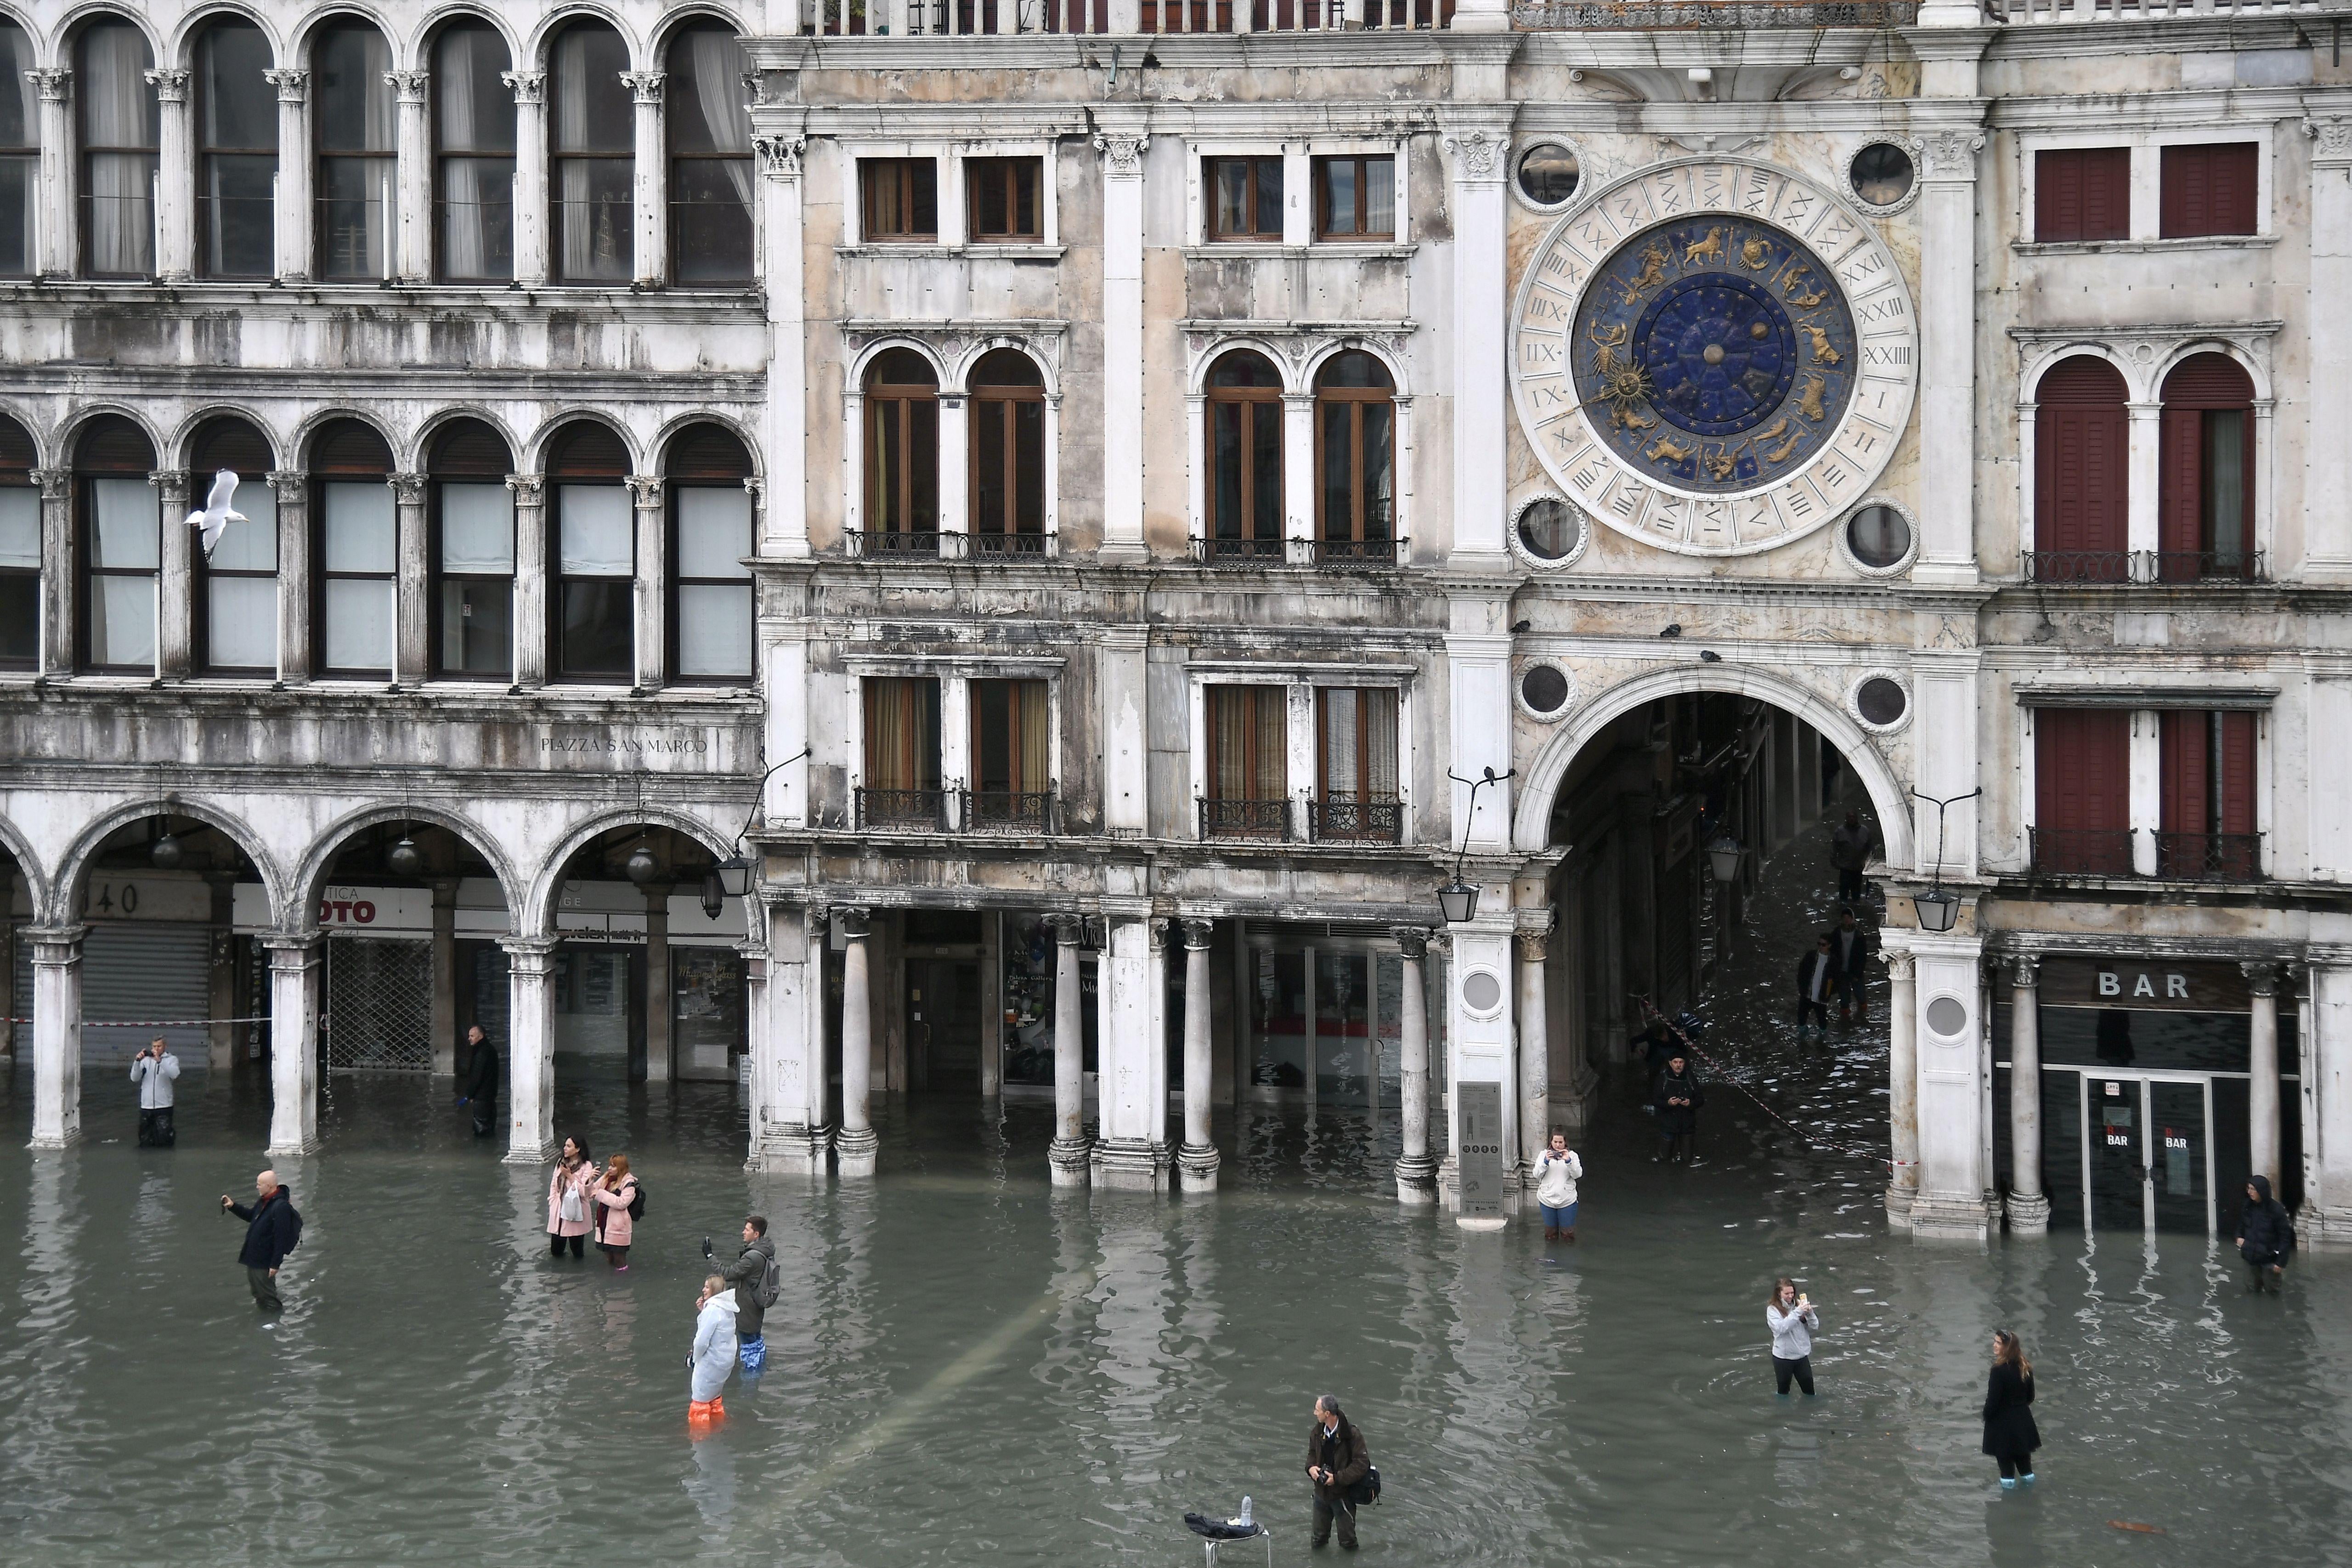 People walk across the flooded St. Mark’s Square.